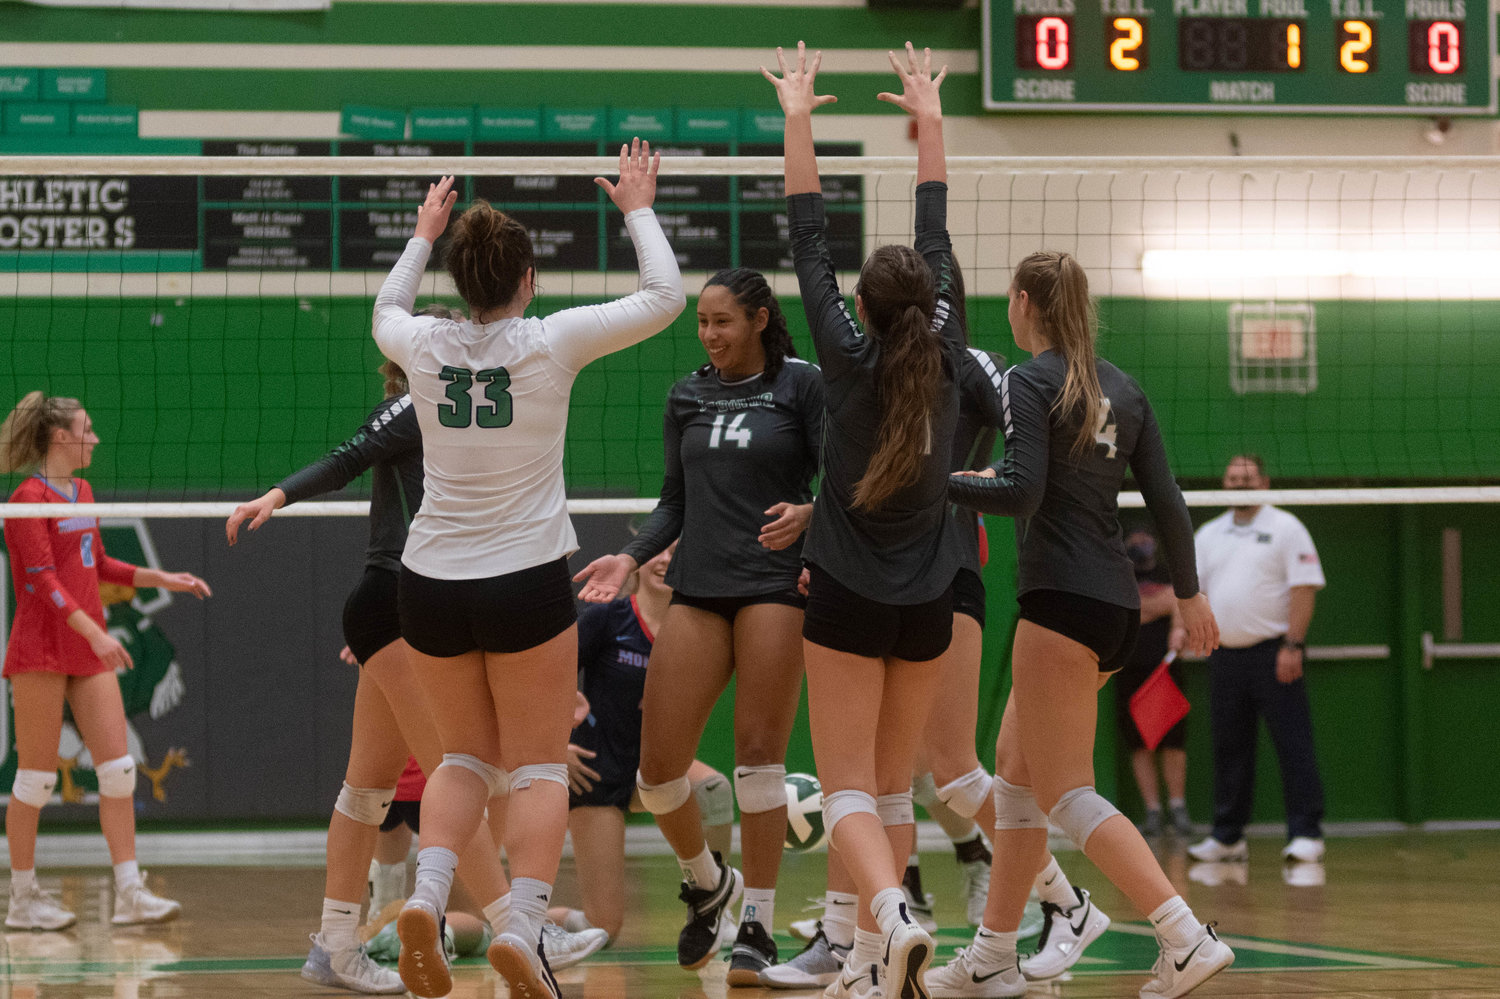 The Tumwater volleyball team celebrates a point against Mark Morris in the opening round of the 2A District 4 tournament Nov. 11.